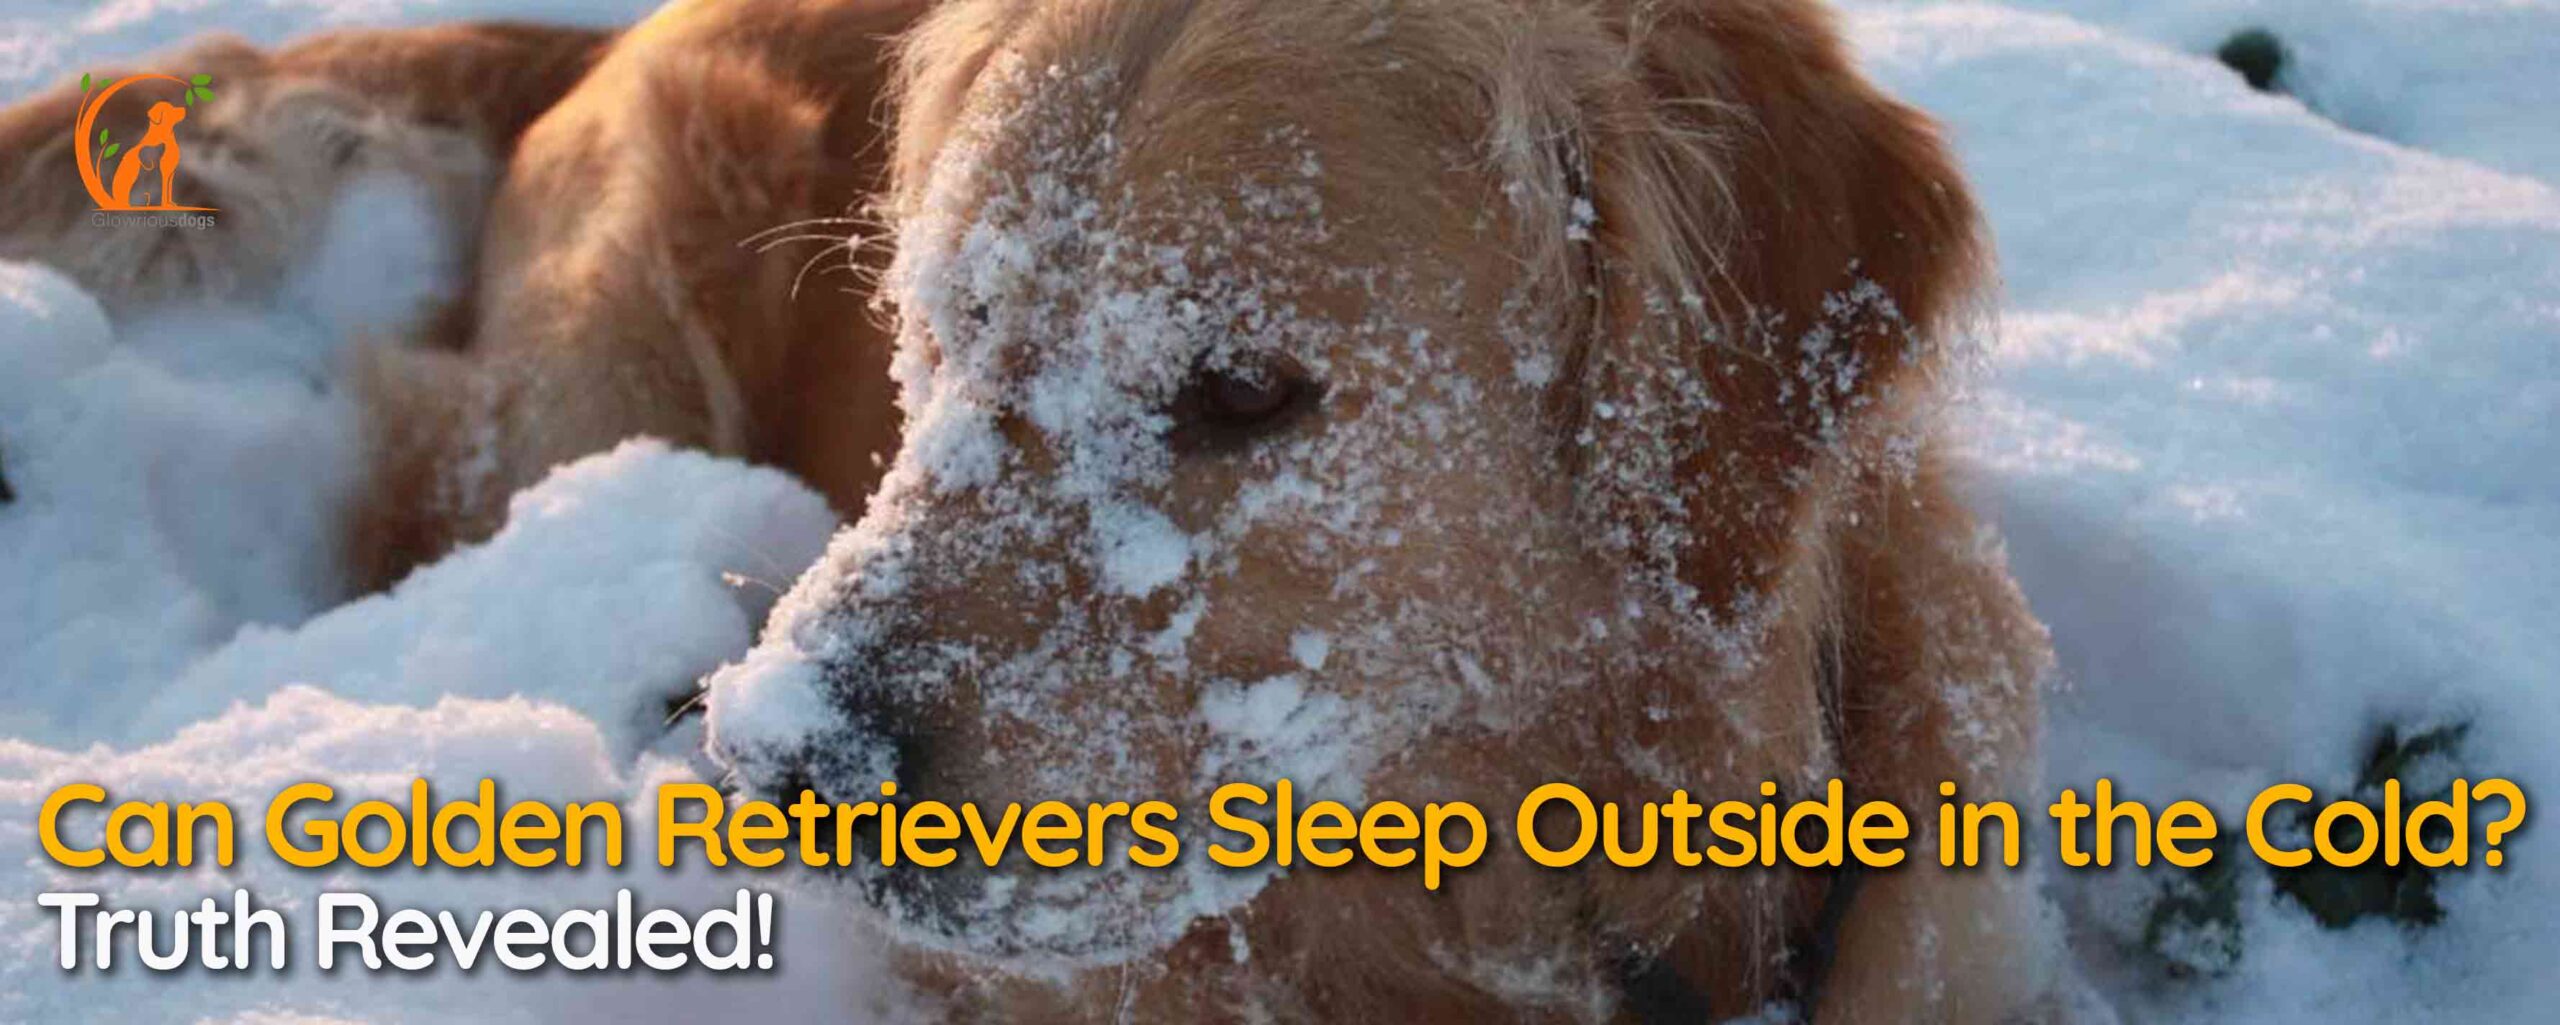 Can Golden Retrievers Sleep Outside in the Cold? Truth Revealed!